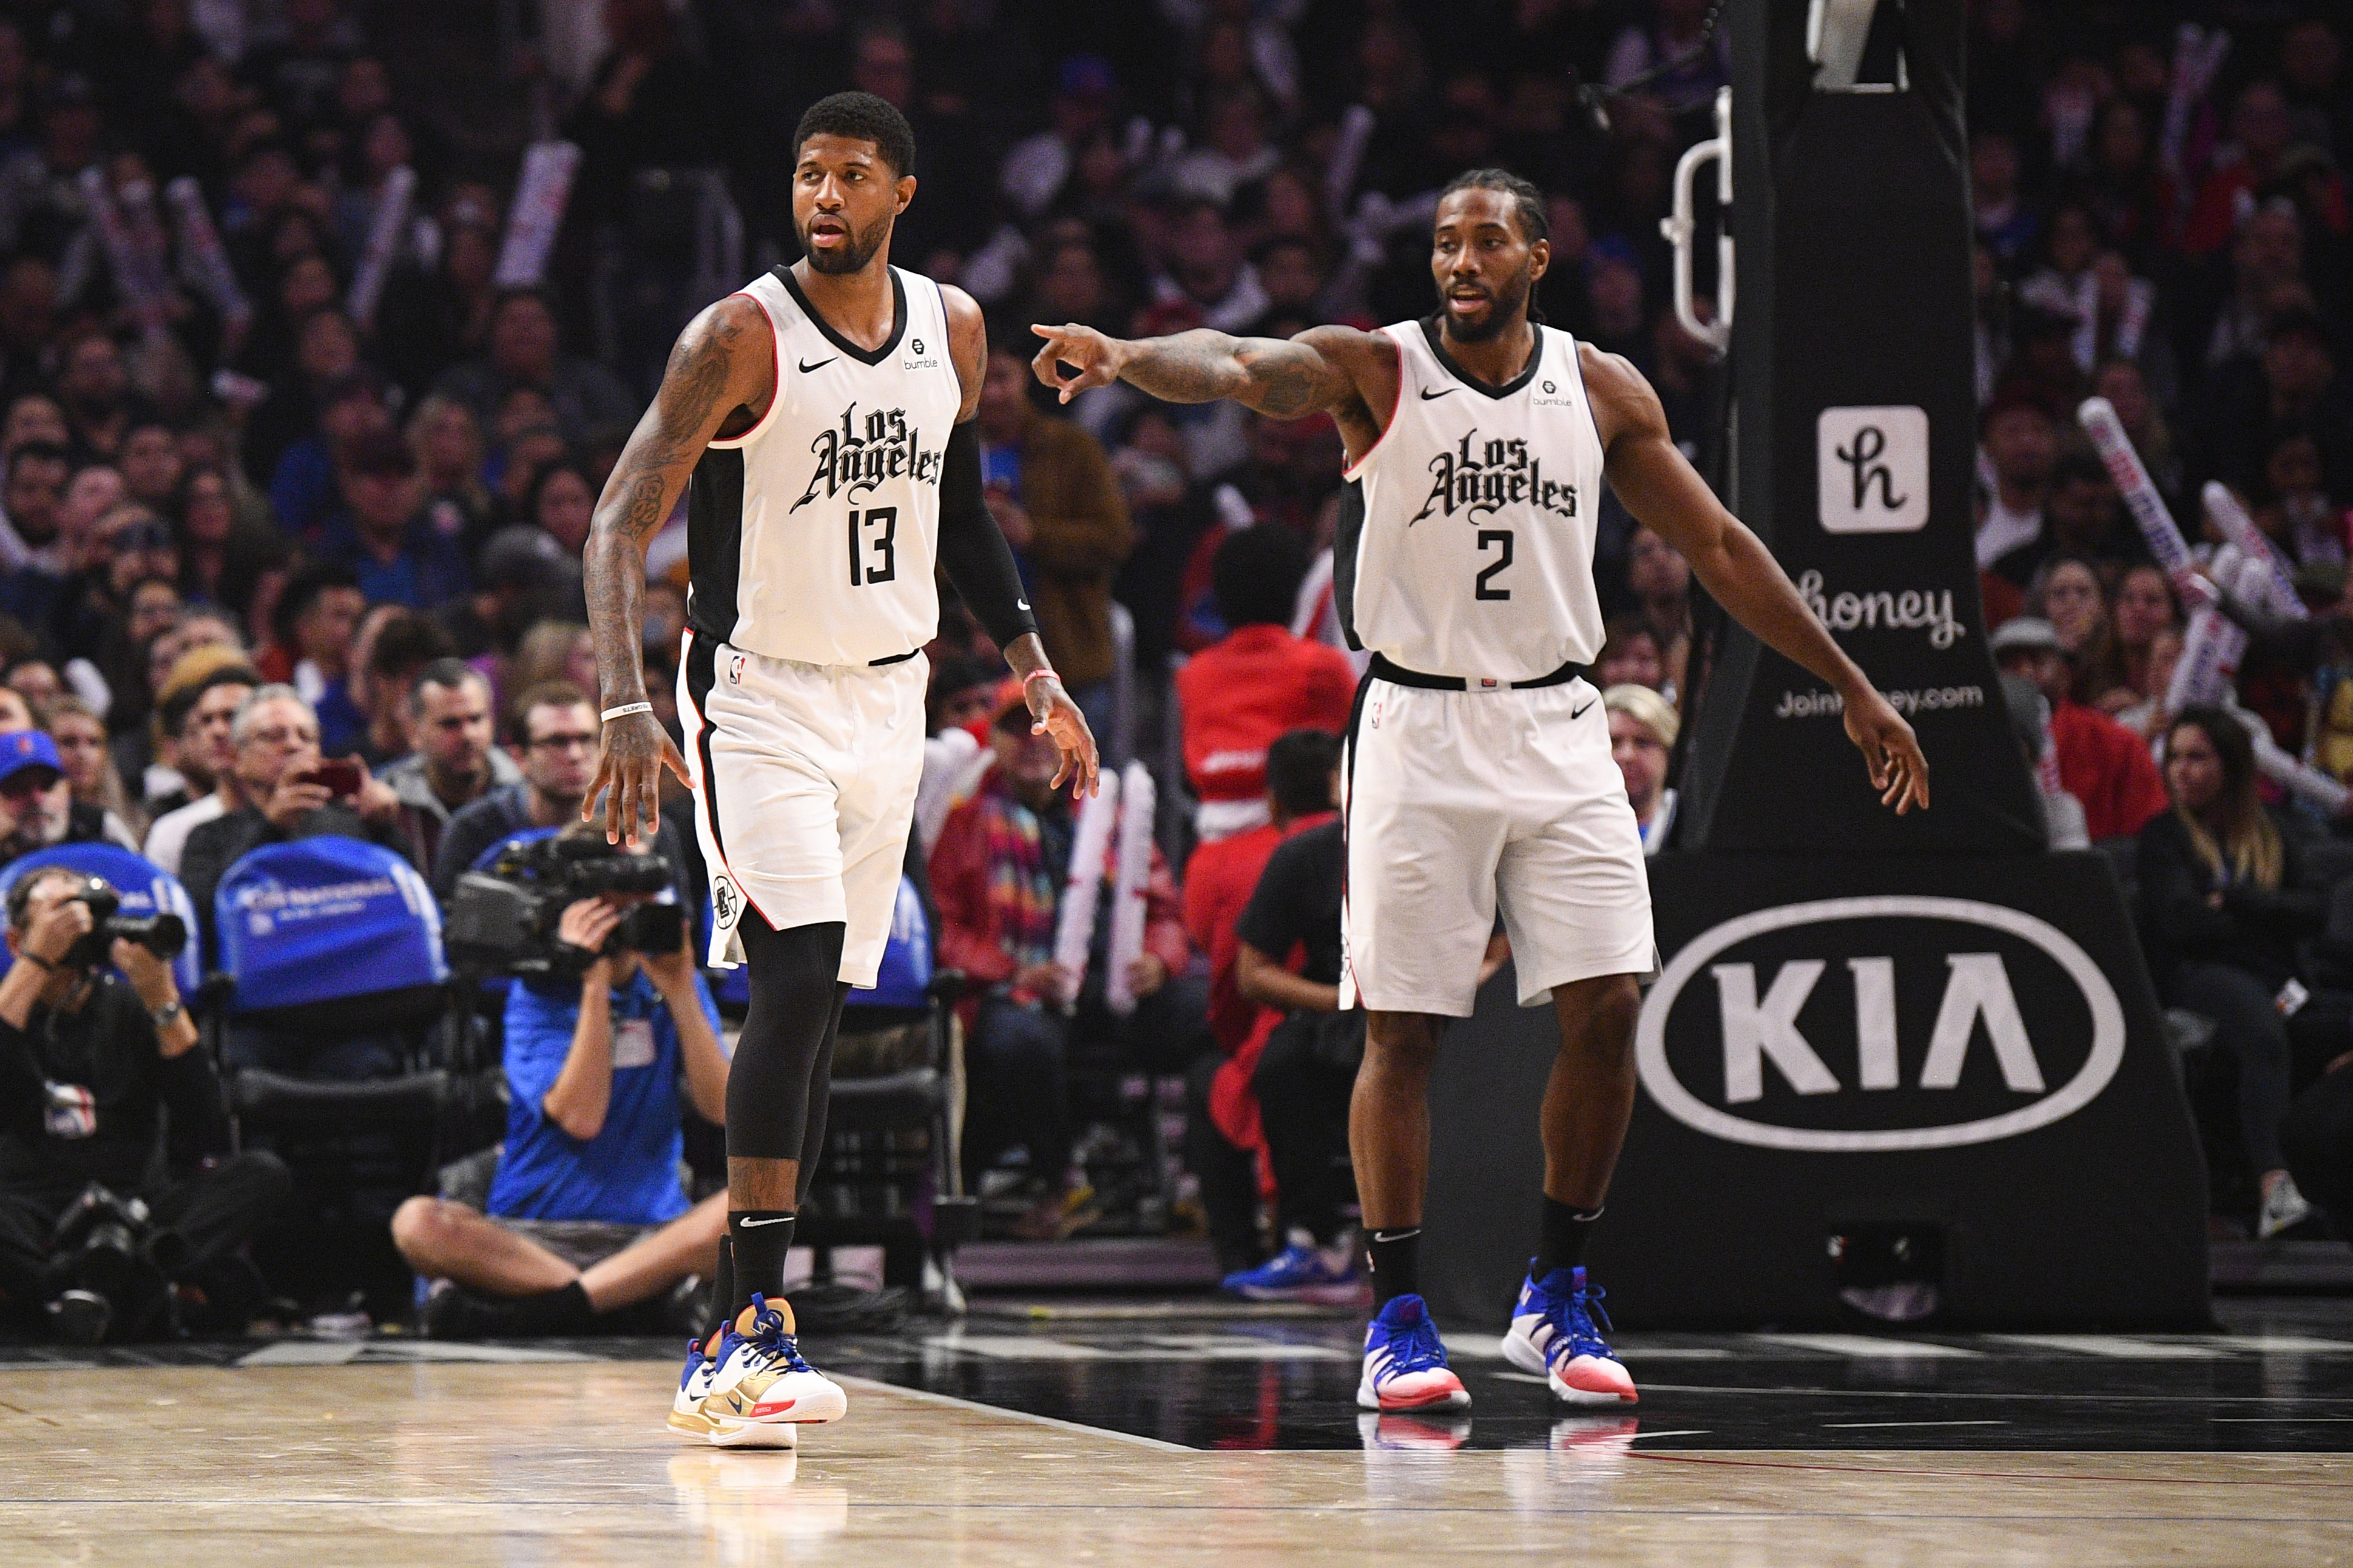 Kawhi Leonard and Paul George’s Behind-the-Scenes Behavior May Have Destroyed the LA Clippers Locker Room